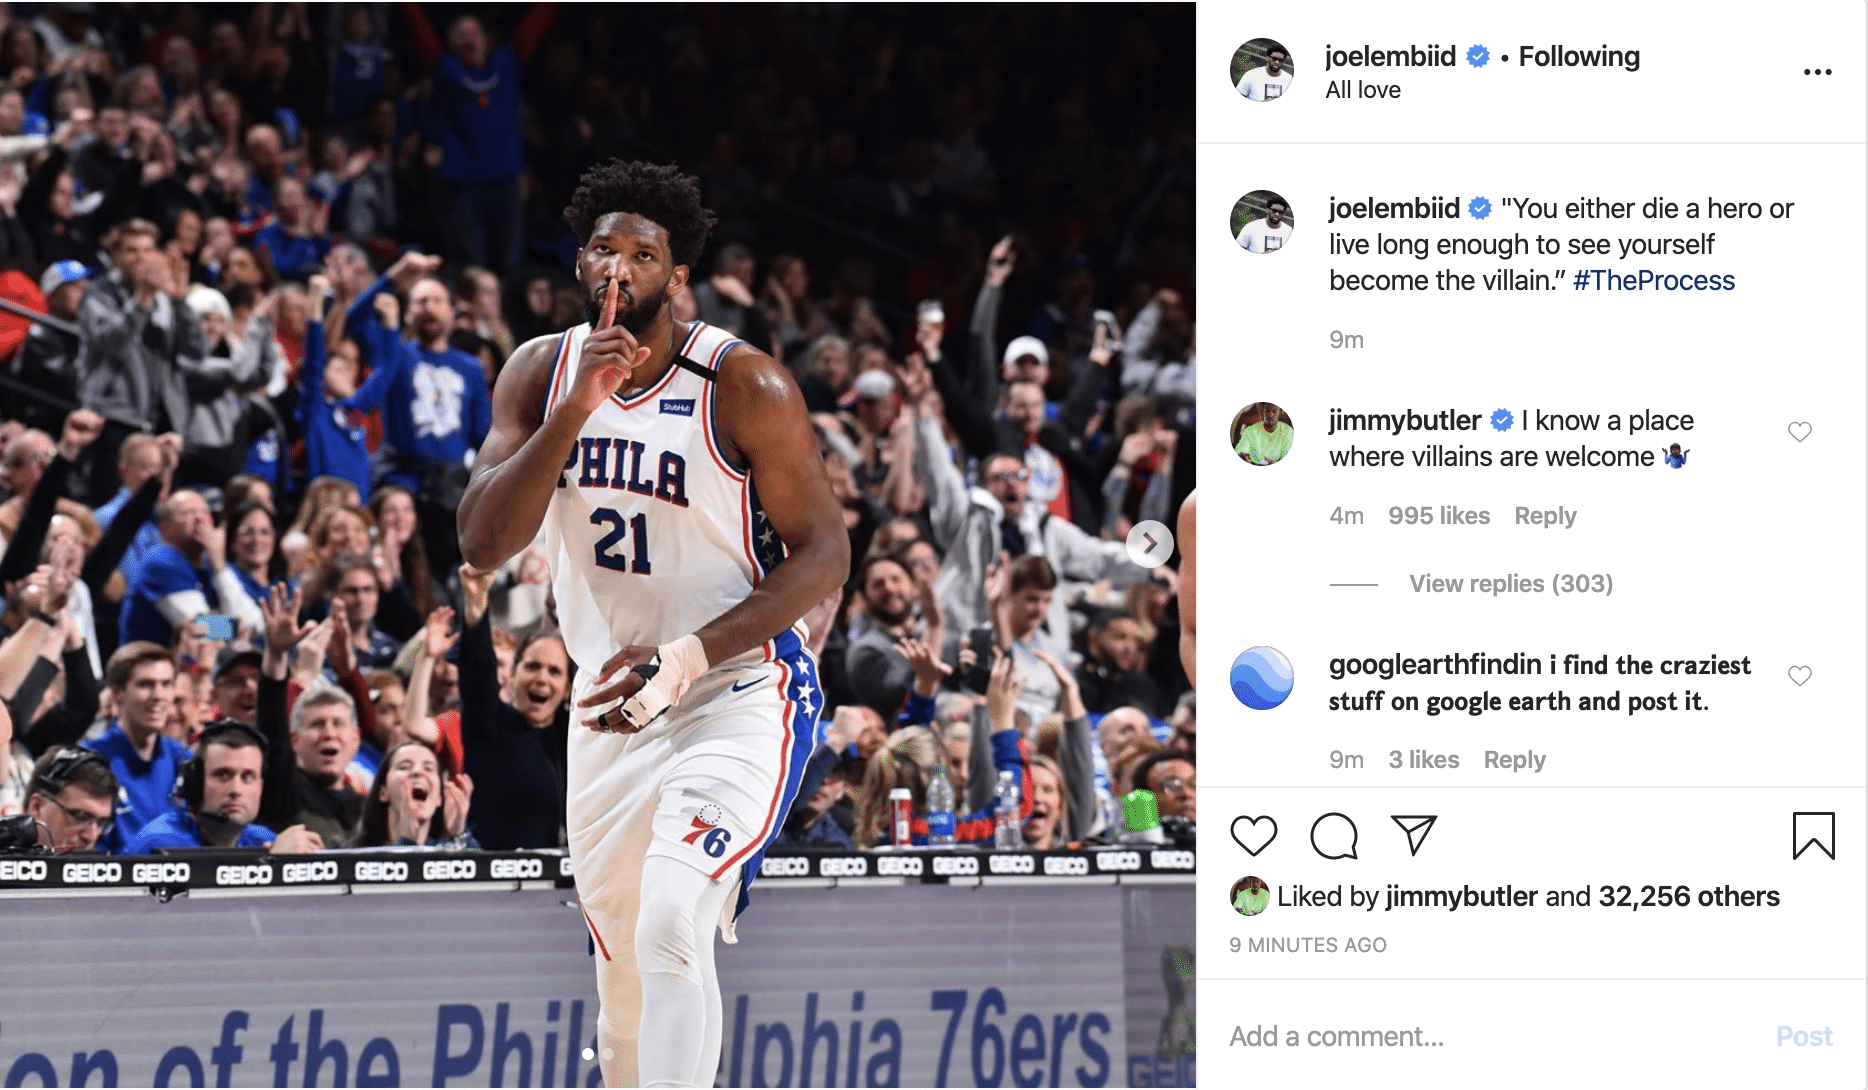 Joel Embiid on Instagram: “You Either Die a Hero or Live Long Enough to See Yourself Become the Villain”